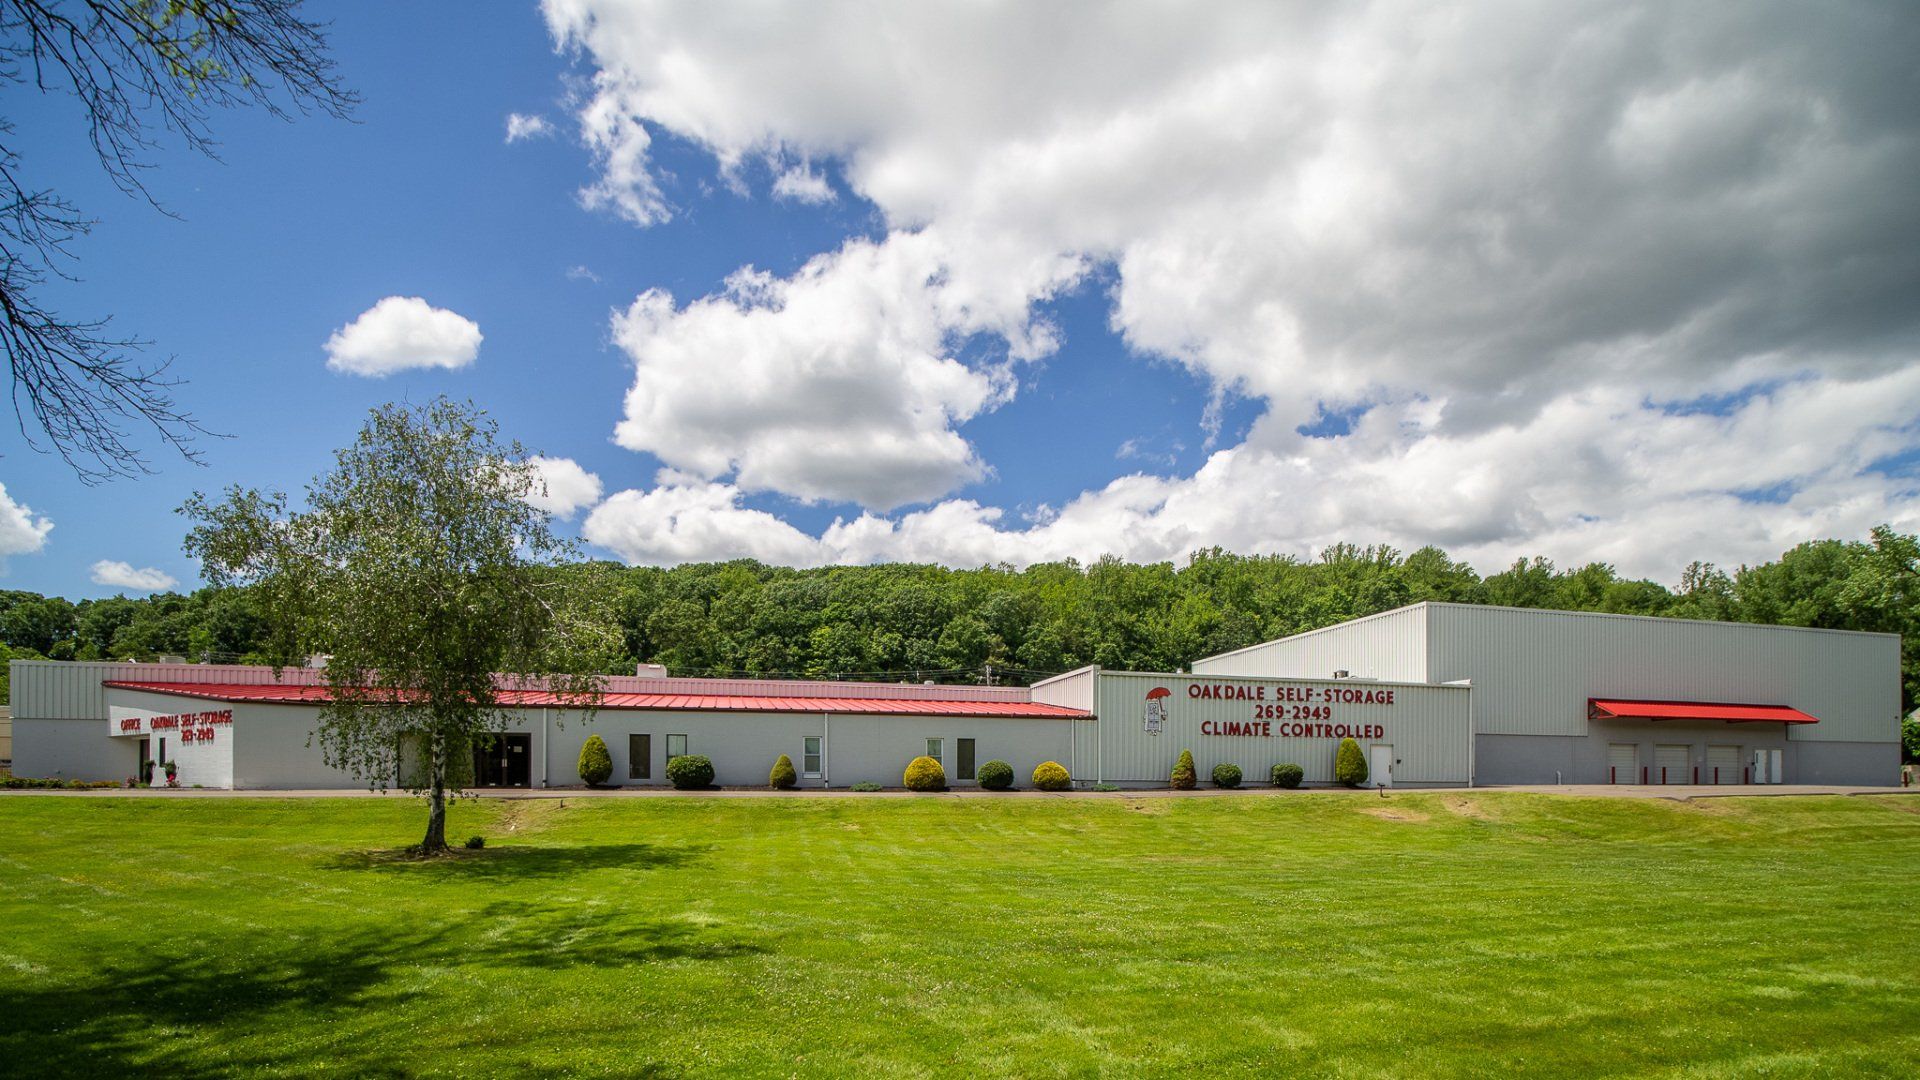 Storage Units & High Quality Storage Facility in the Trumbull, CT Area